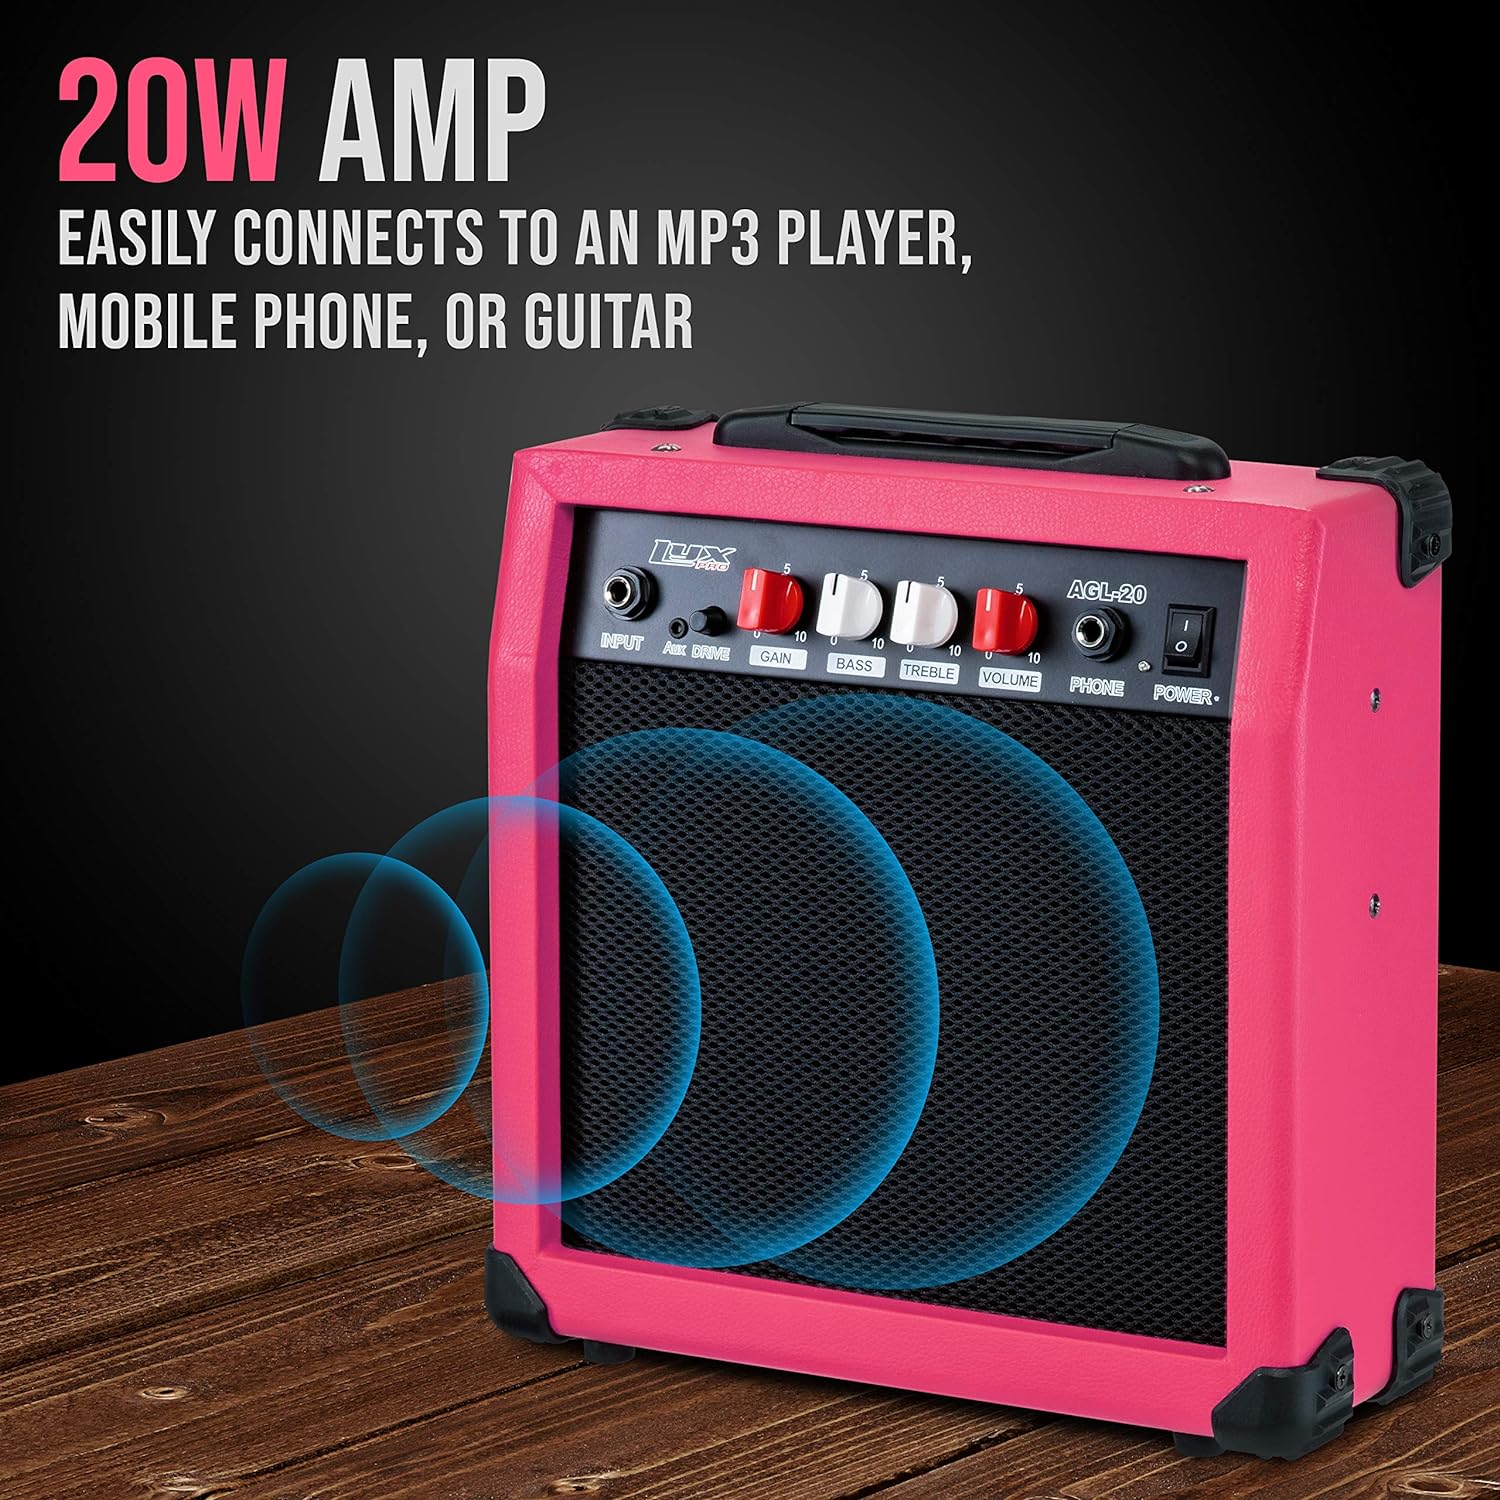 LyxPro Electric Guitar Amp 20 Watt Amplifier Built In Speaker Headphone Jack And Aux Input Includes Gain Bass Treble Volume And Grind - Pink